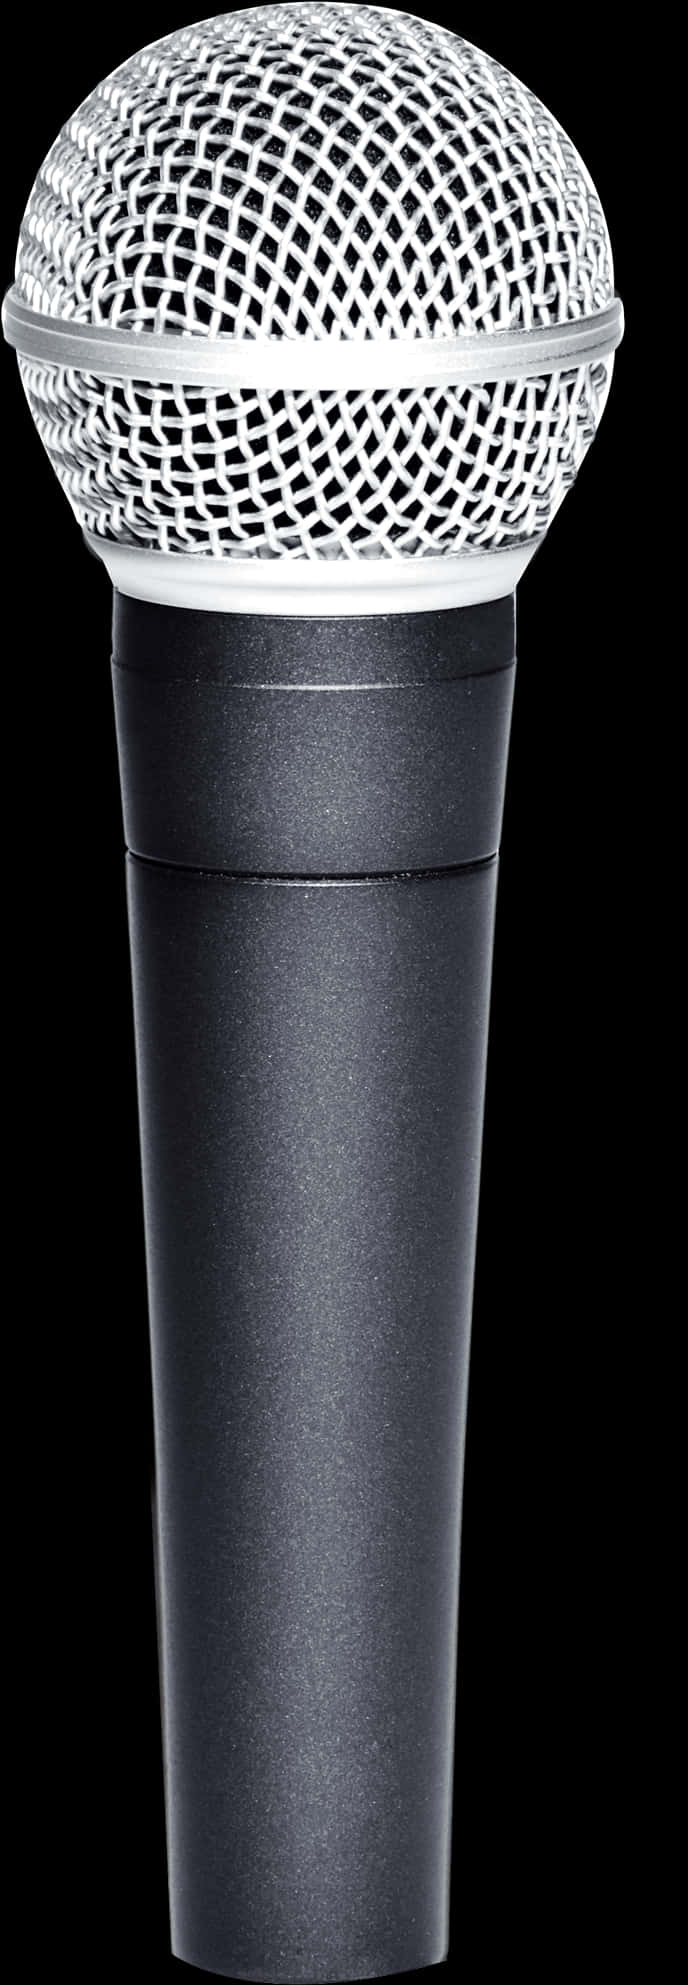 Professional Handheld Microphone Isolated PNG